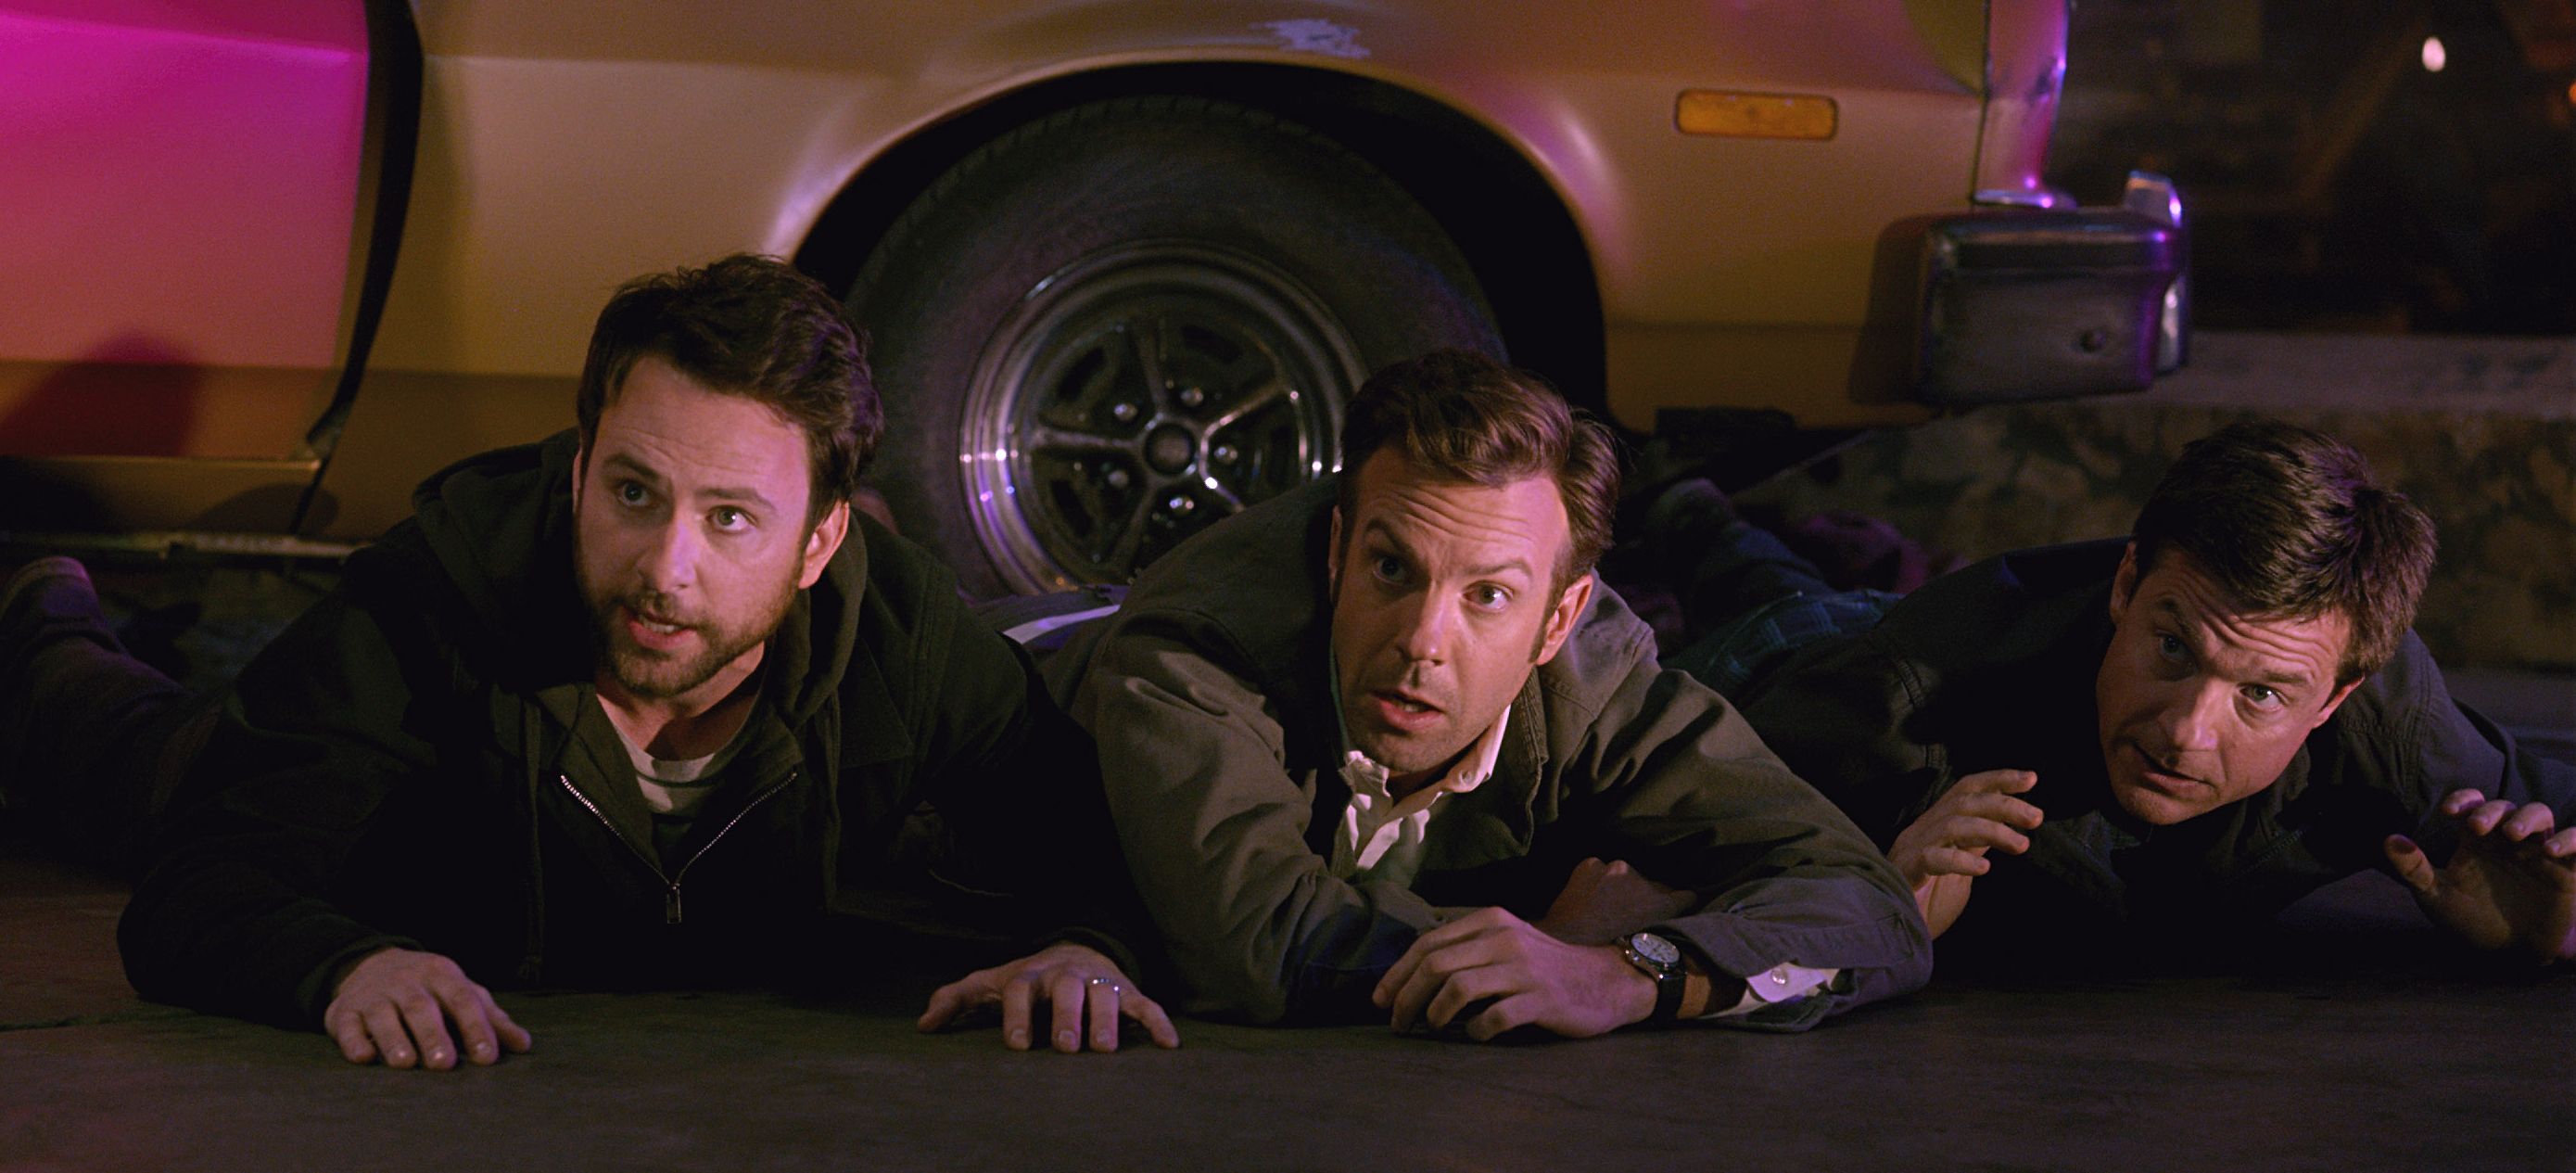 Horrible Bosses 2 - laying down